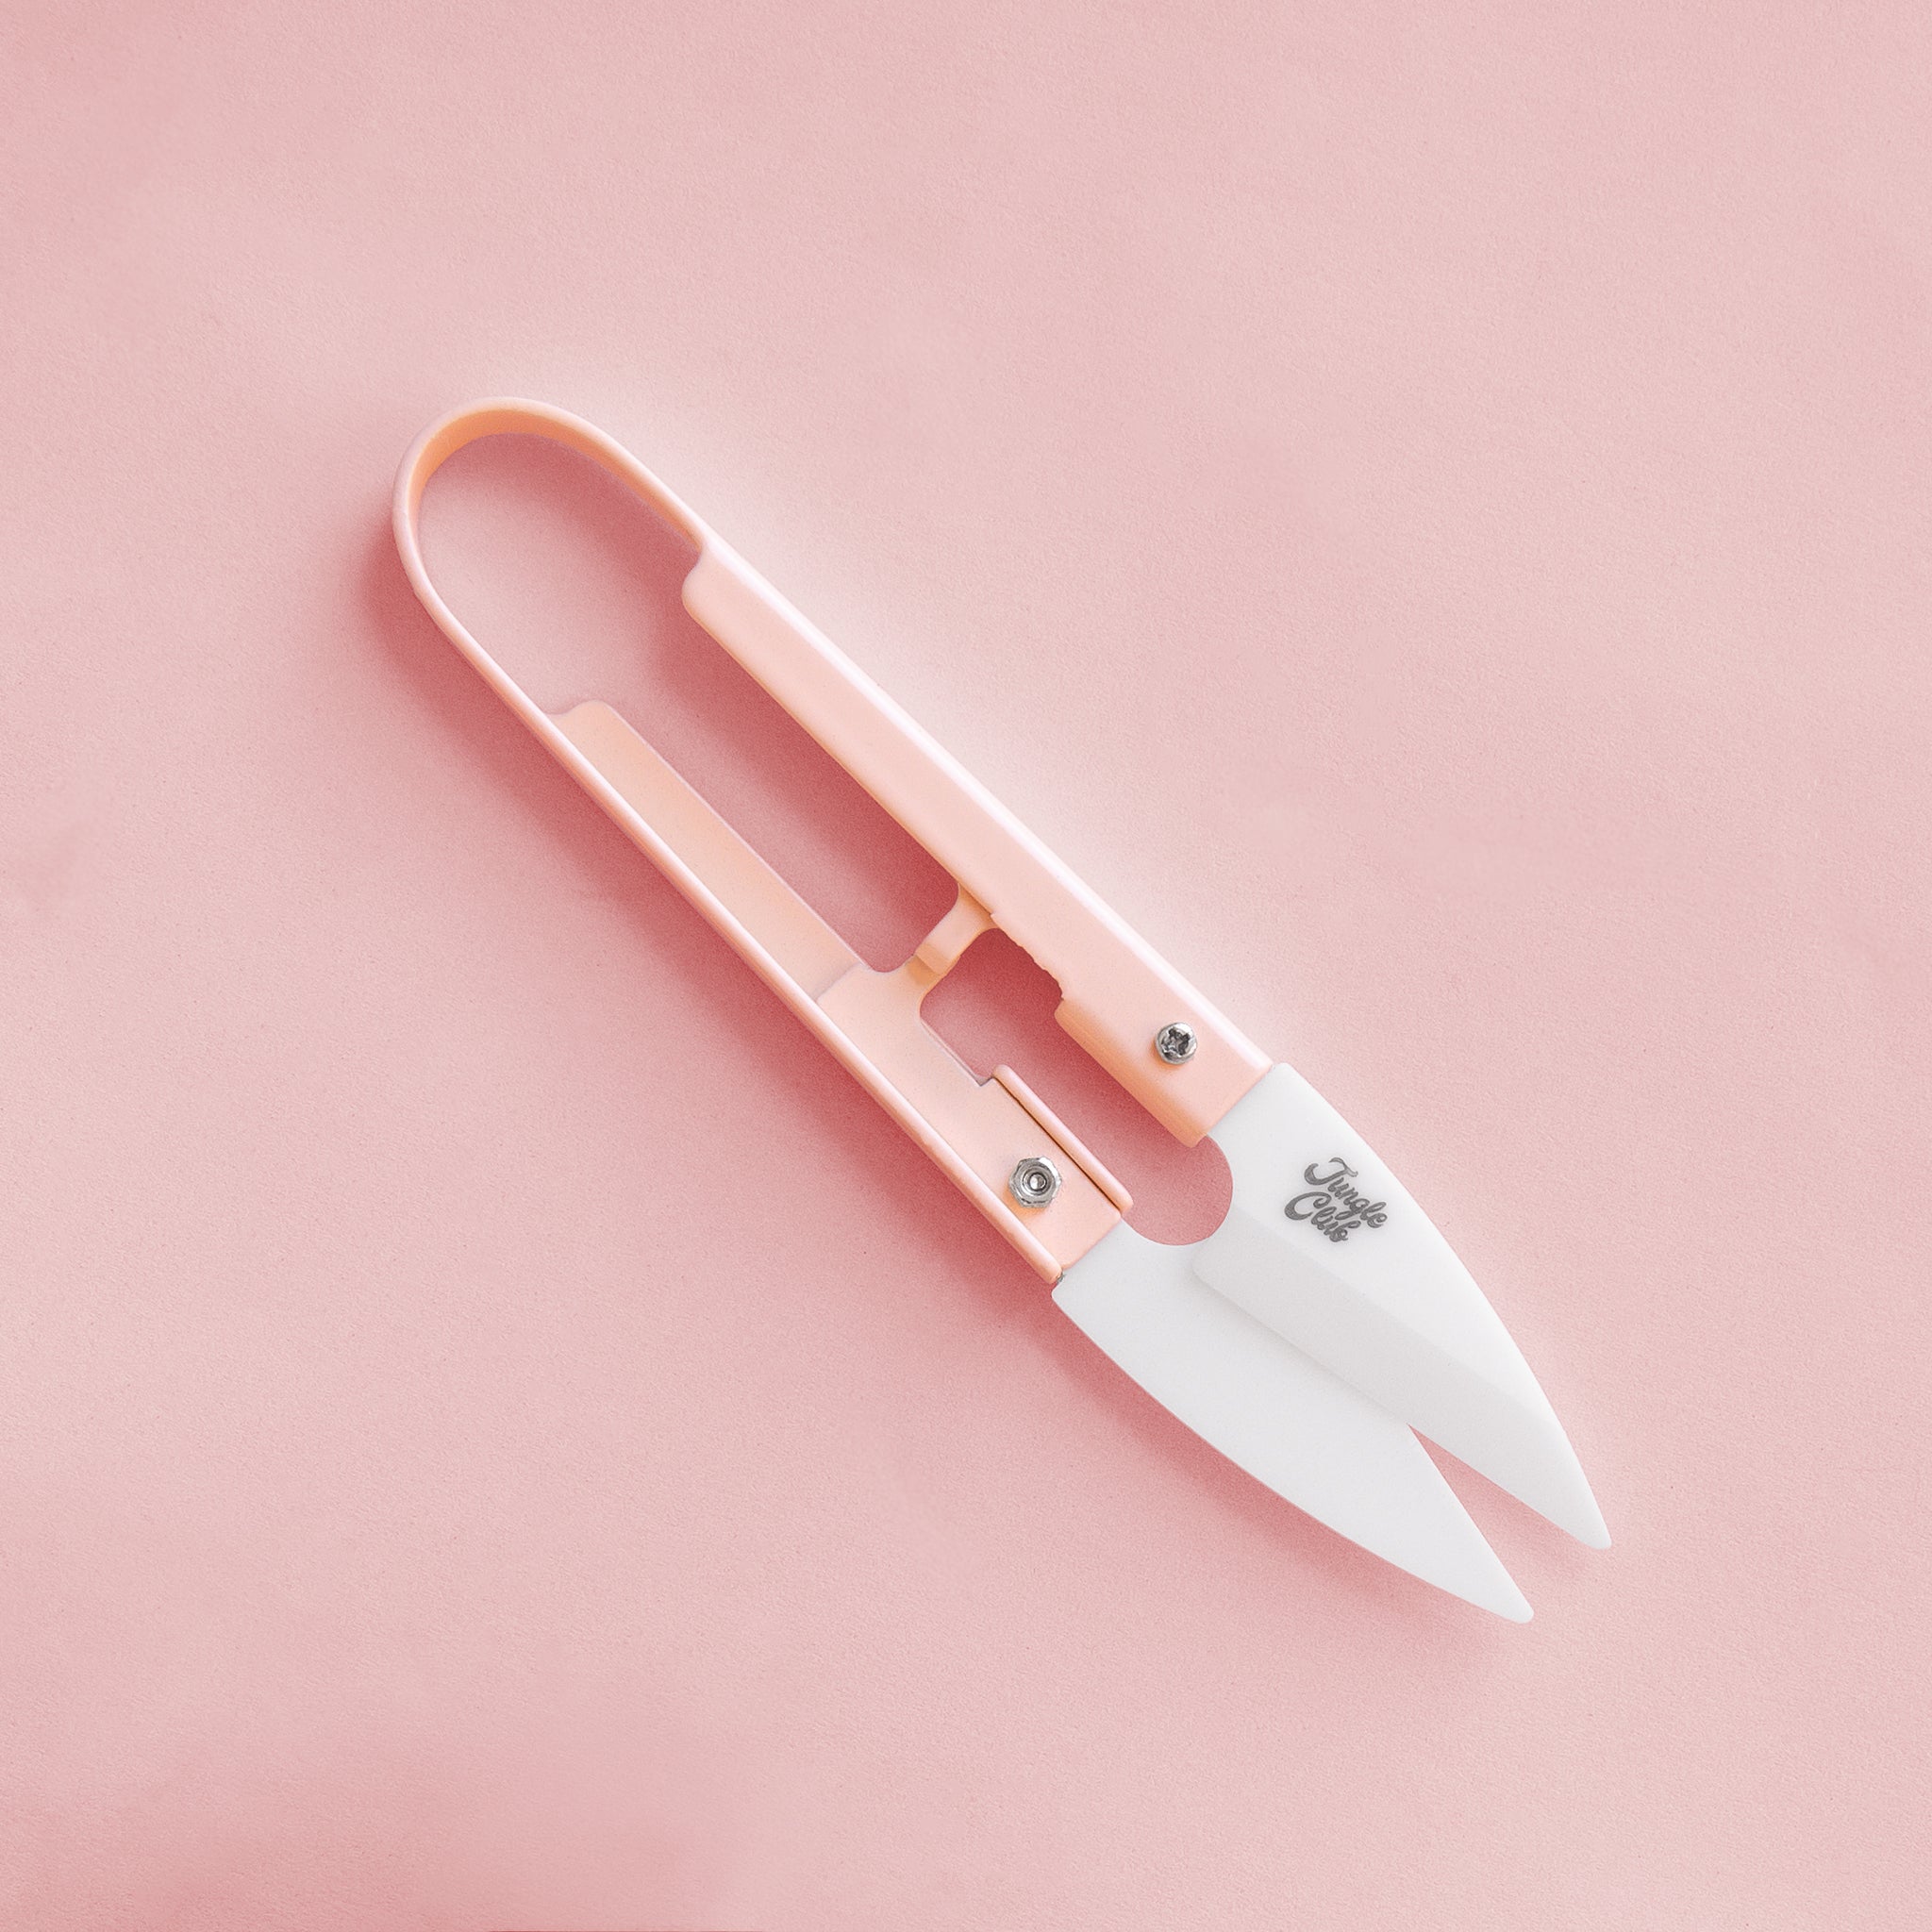 On a pink background is a pair of pink mini plant shears with small text on the clippers that reads, "Jungle Club".